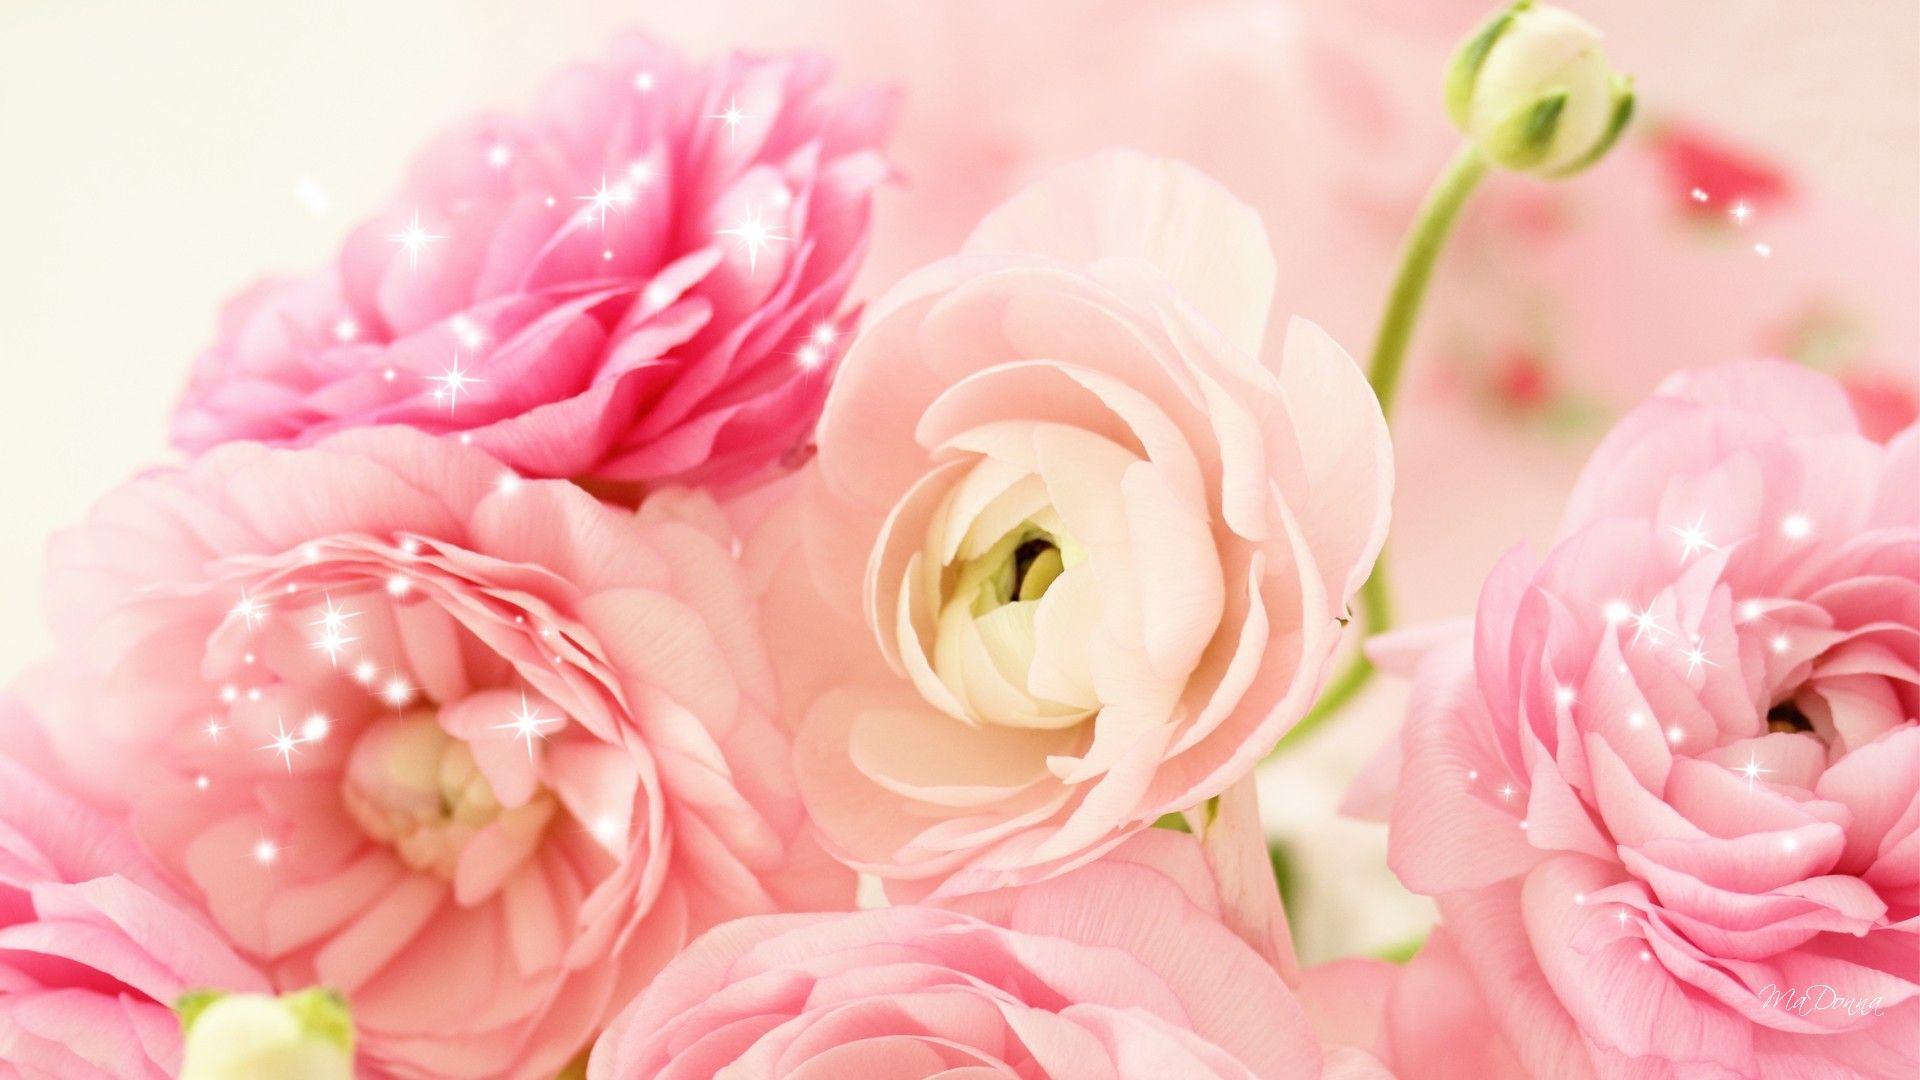 Peach Peonies Background HD Wallpaper, Background Image